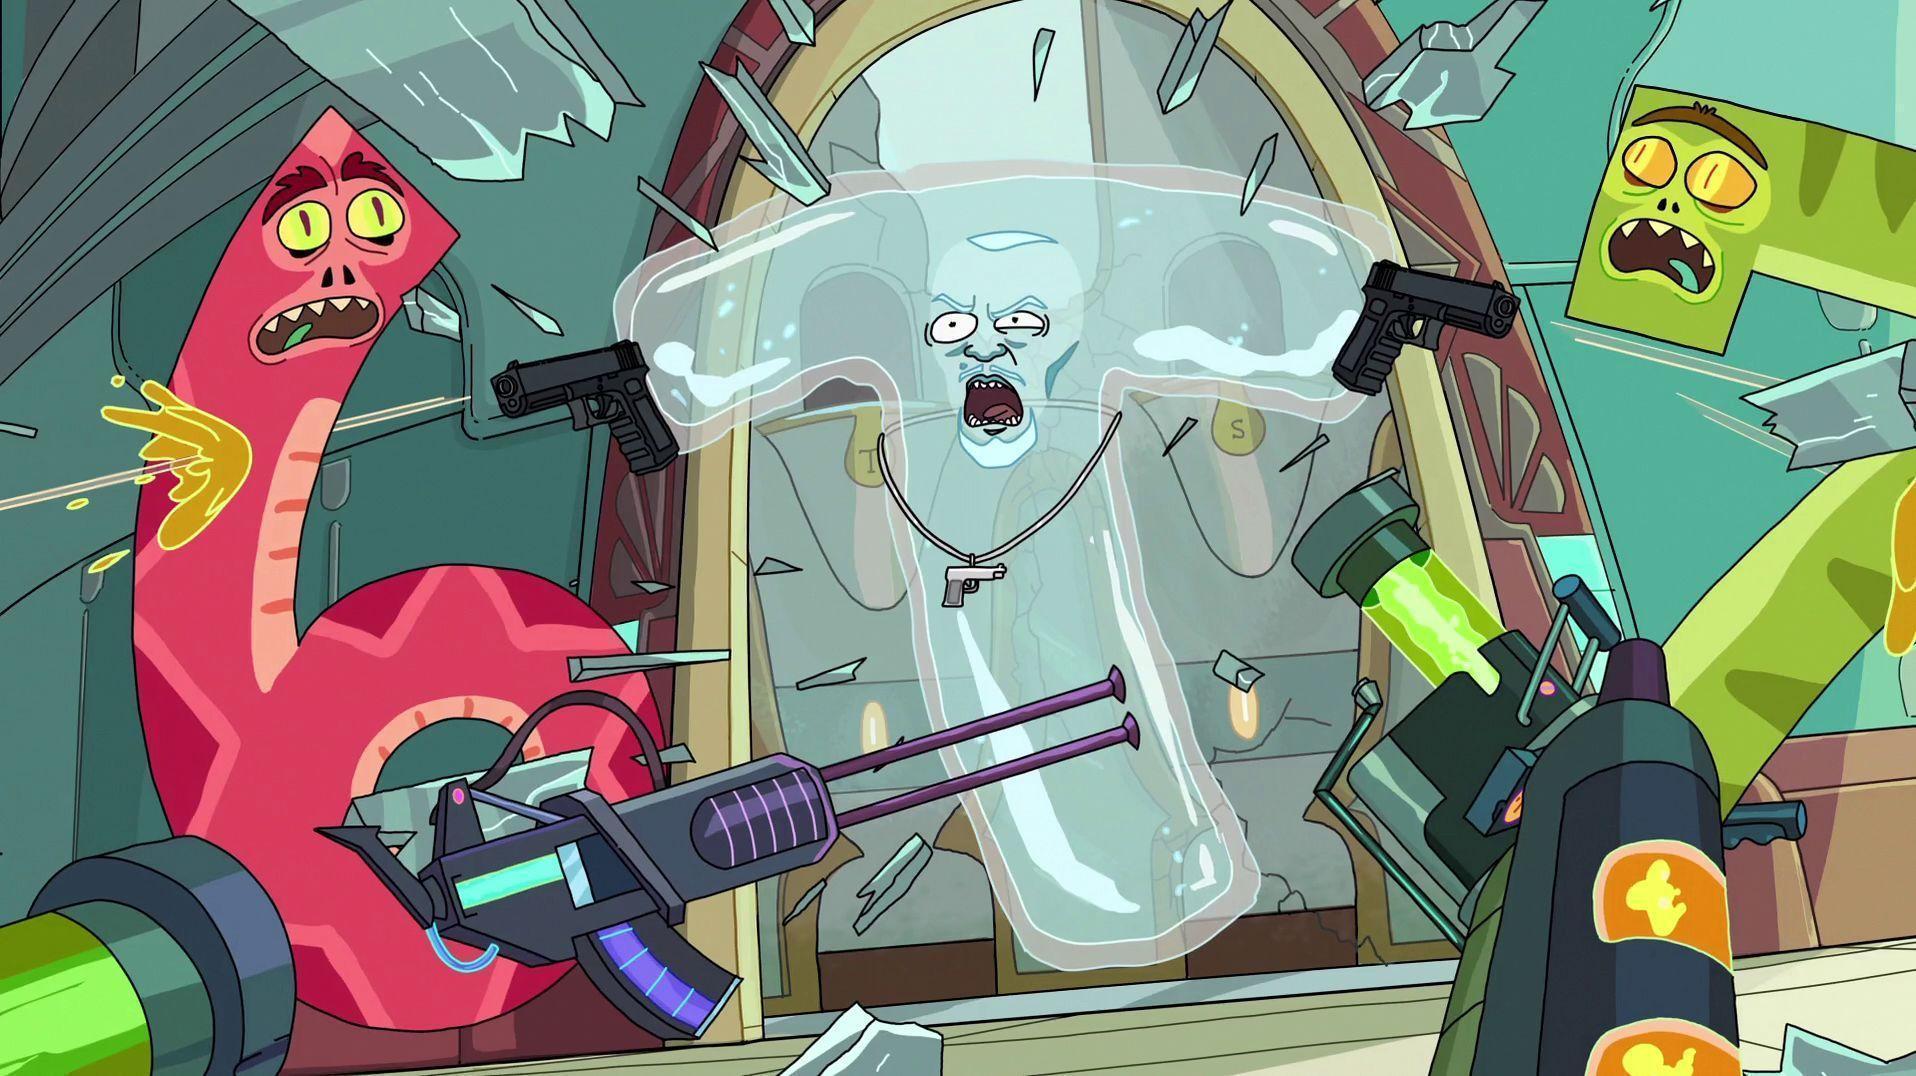 Rick and Morty Season 3 Preview Video Is Very Violent